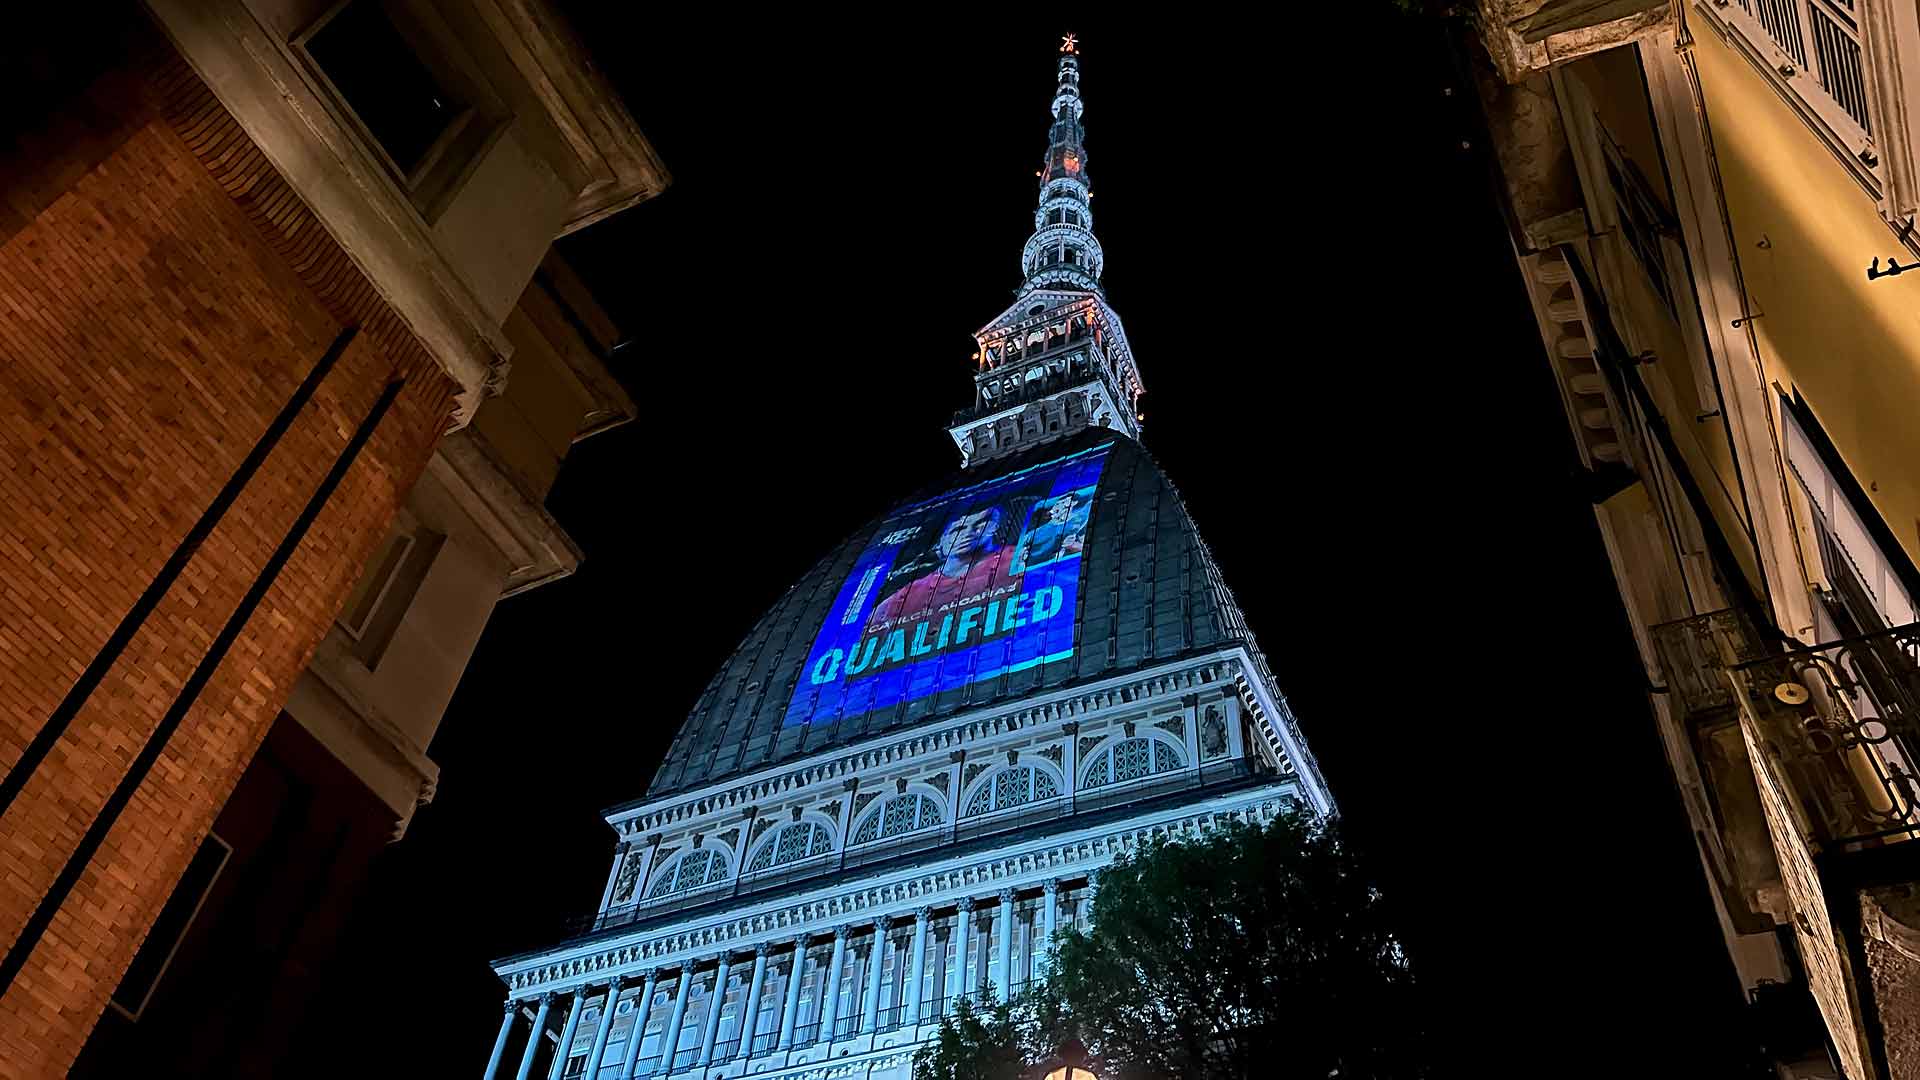 The Mole Antonelliana, the landmark of the City of Turin, displays Carlos Alcaraz as the first qualified player of the 2023 Nitto ATP Finals.